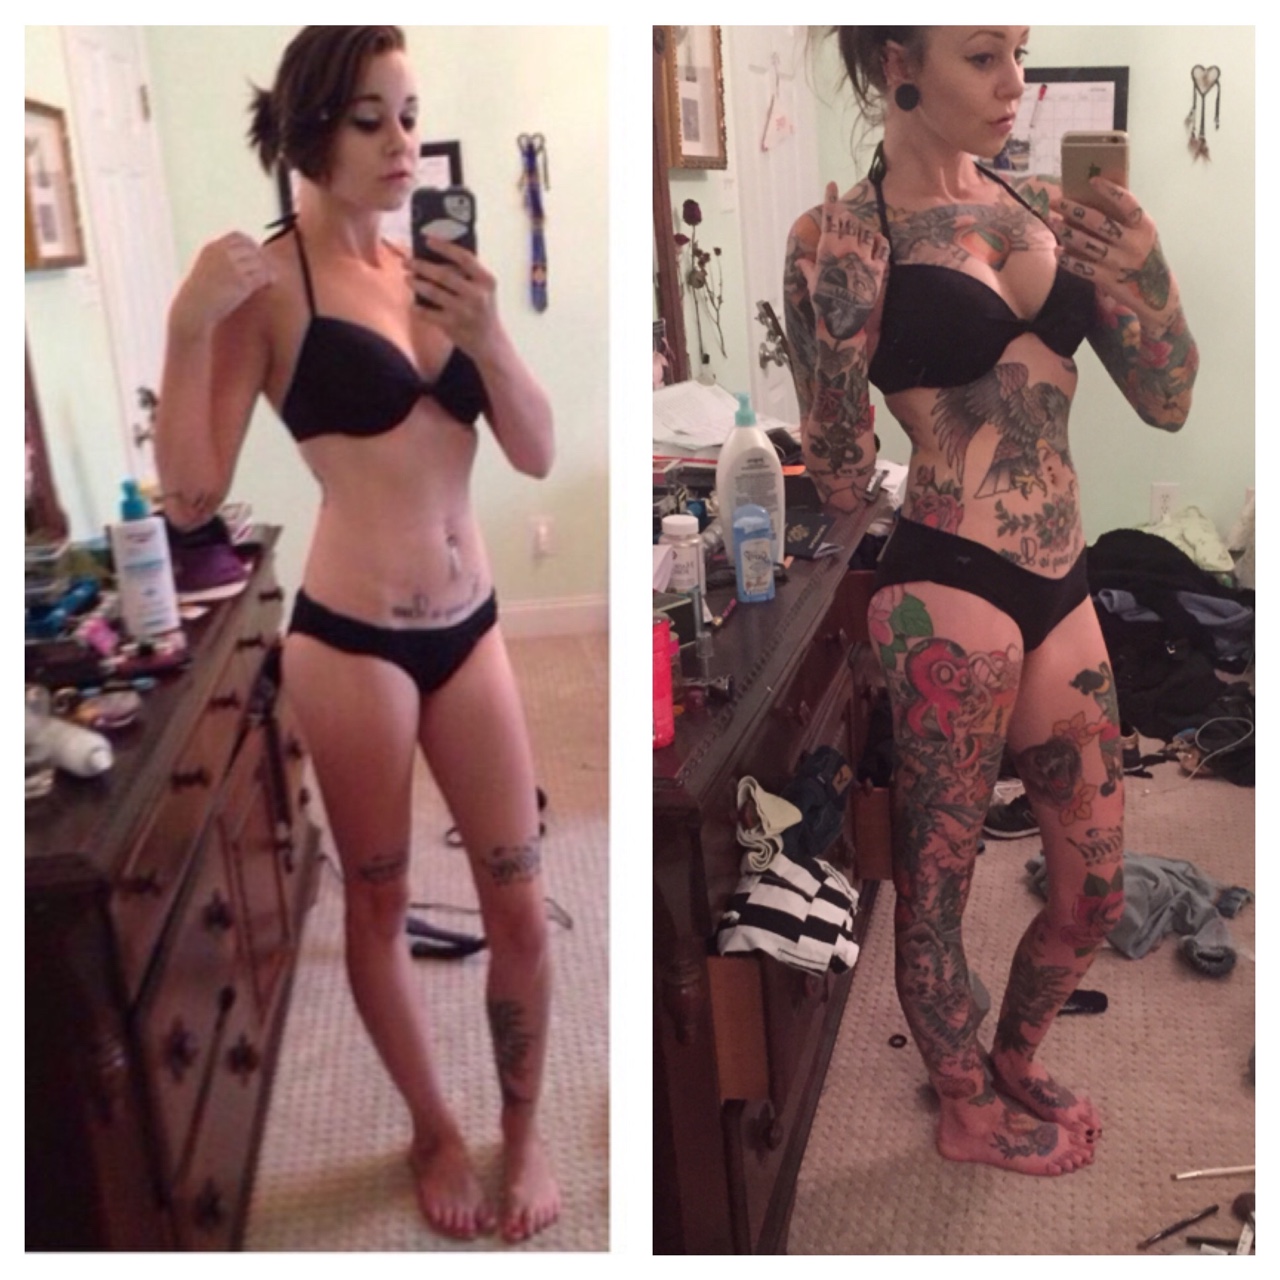 Before and after photos of the same girl showing how her tattoos progressed.